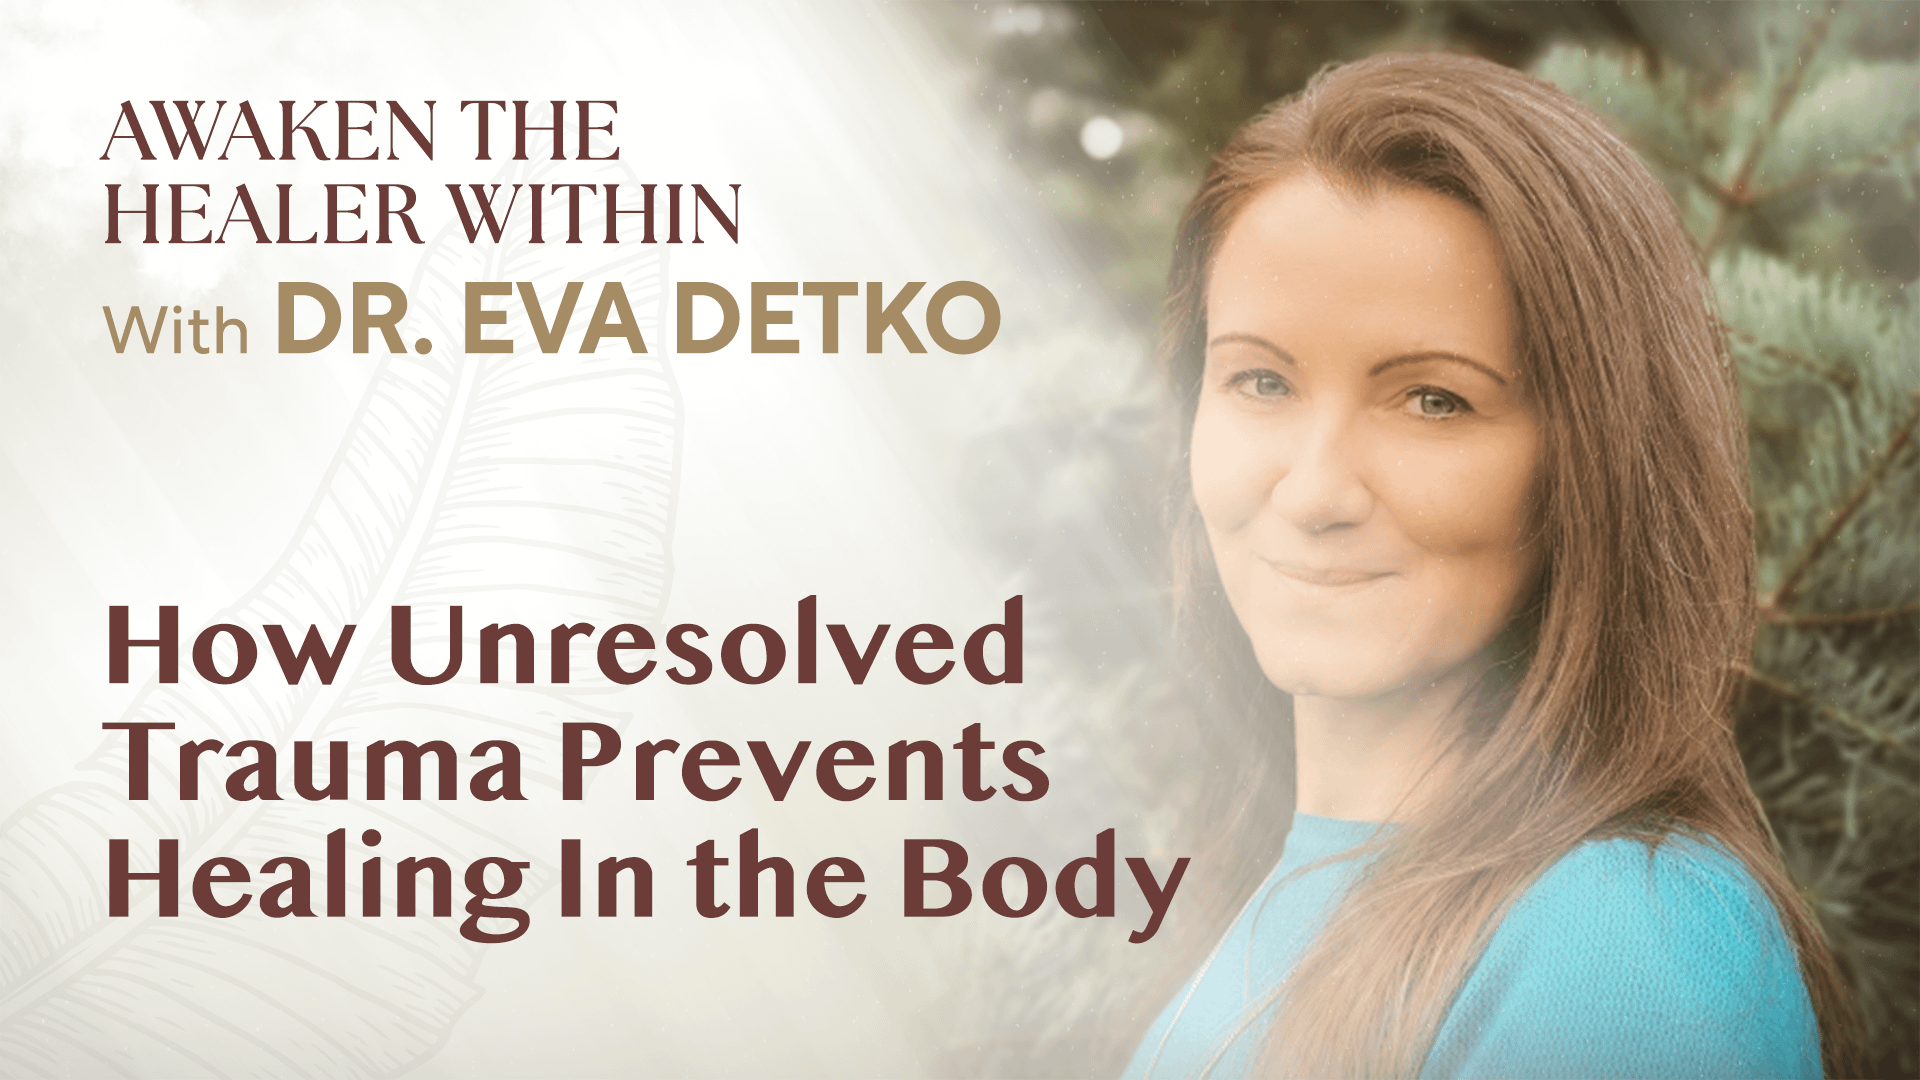 How Unresolved Trauma Prevents Healing In the Body